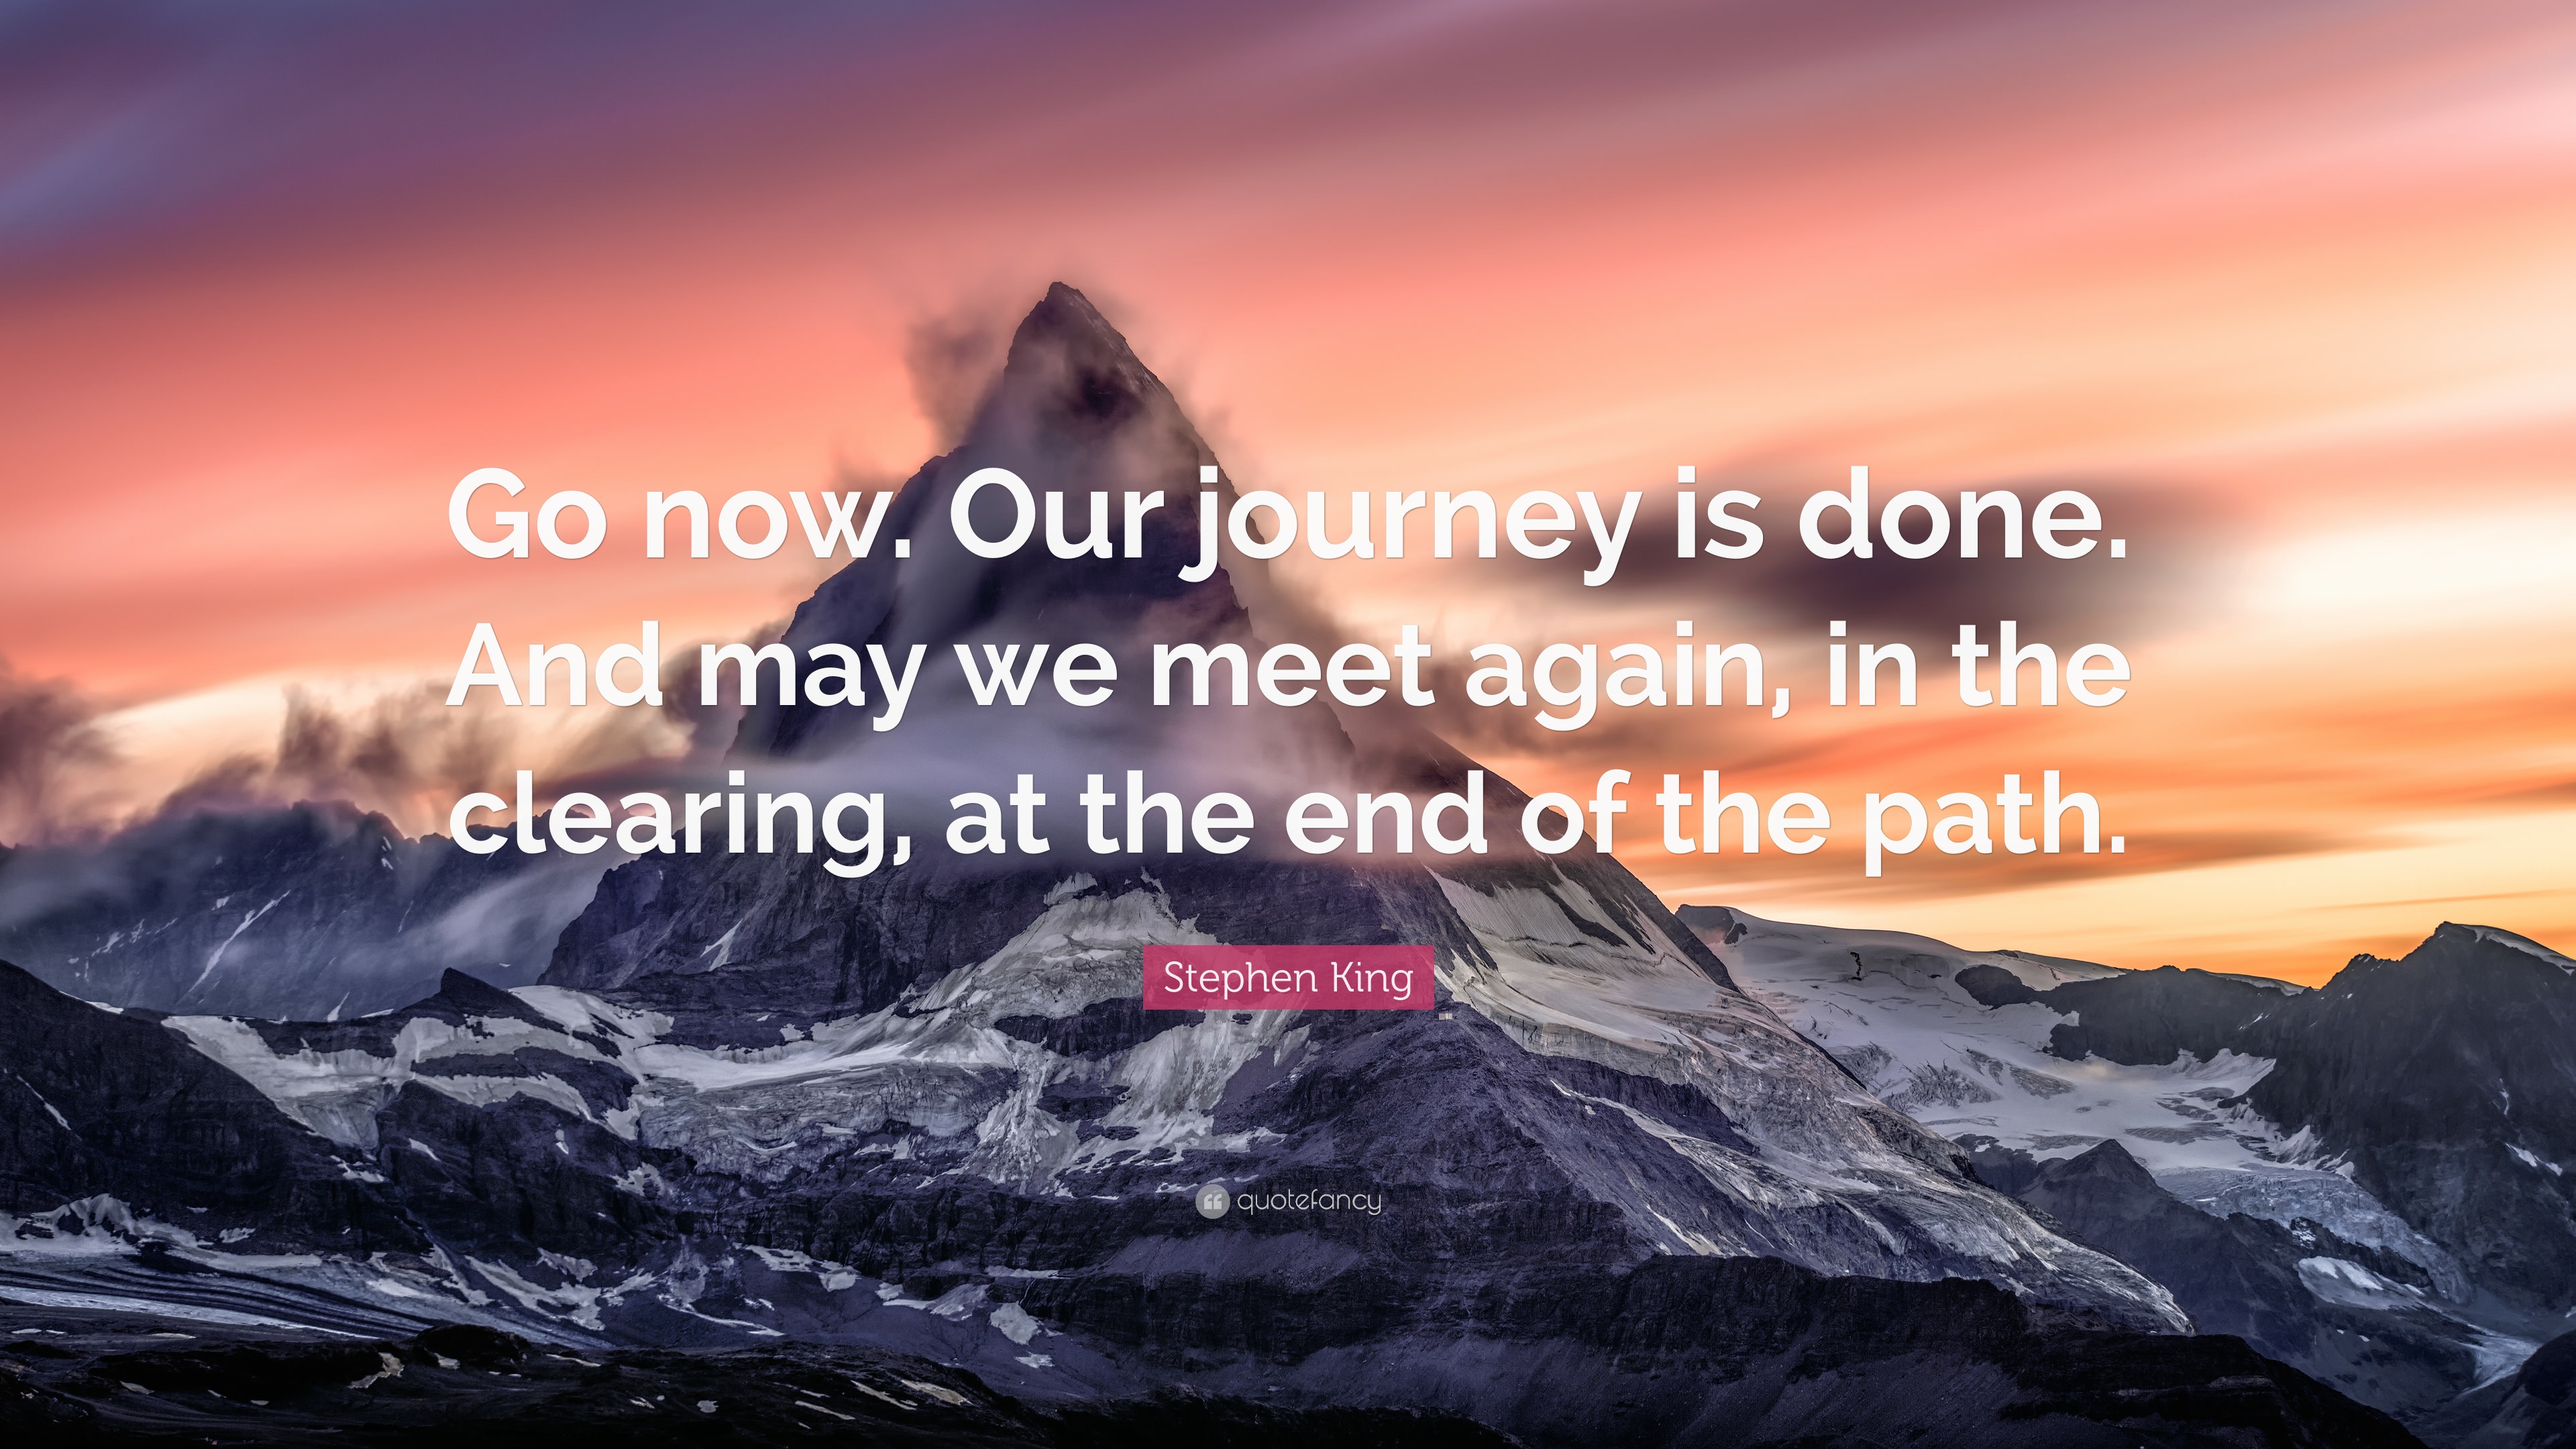 Stephen King Quote: “Go now. Our journey is done. And may we meet again